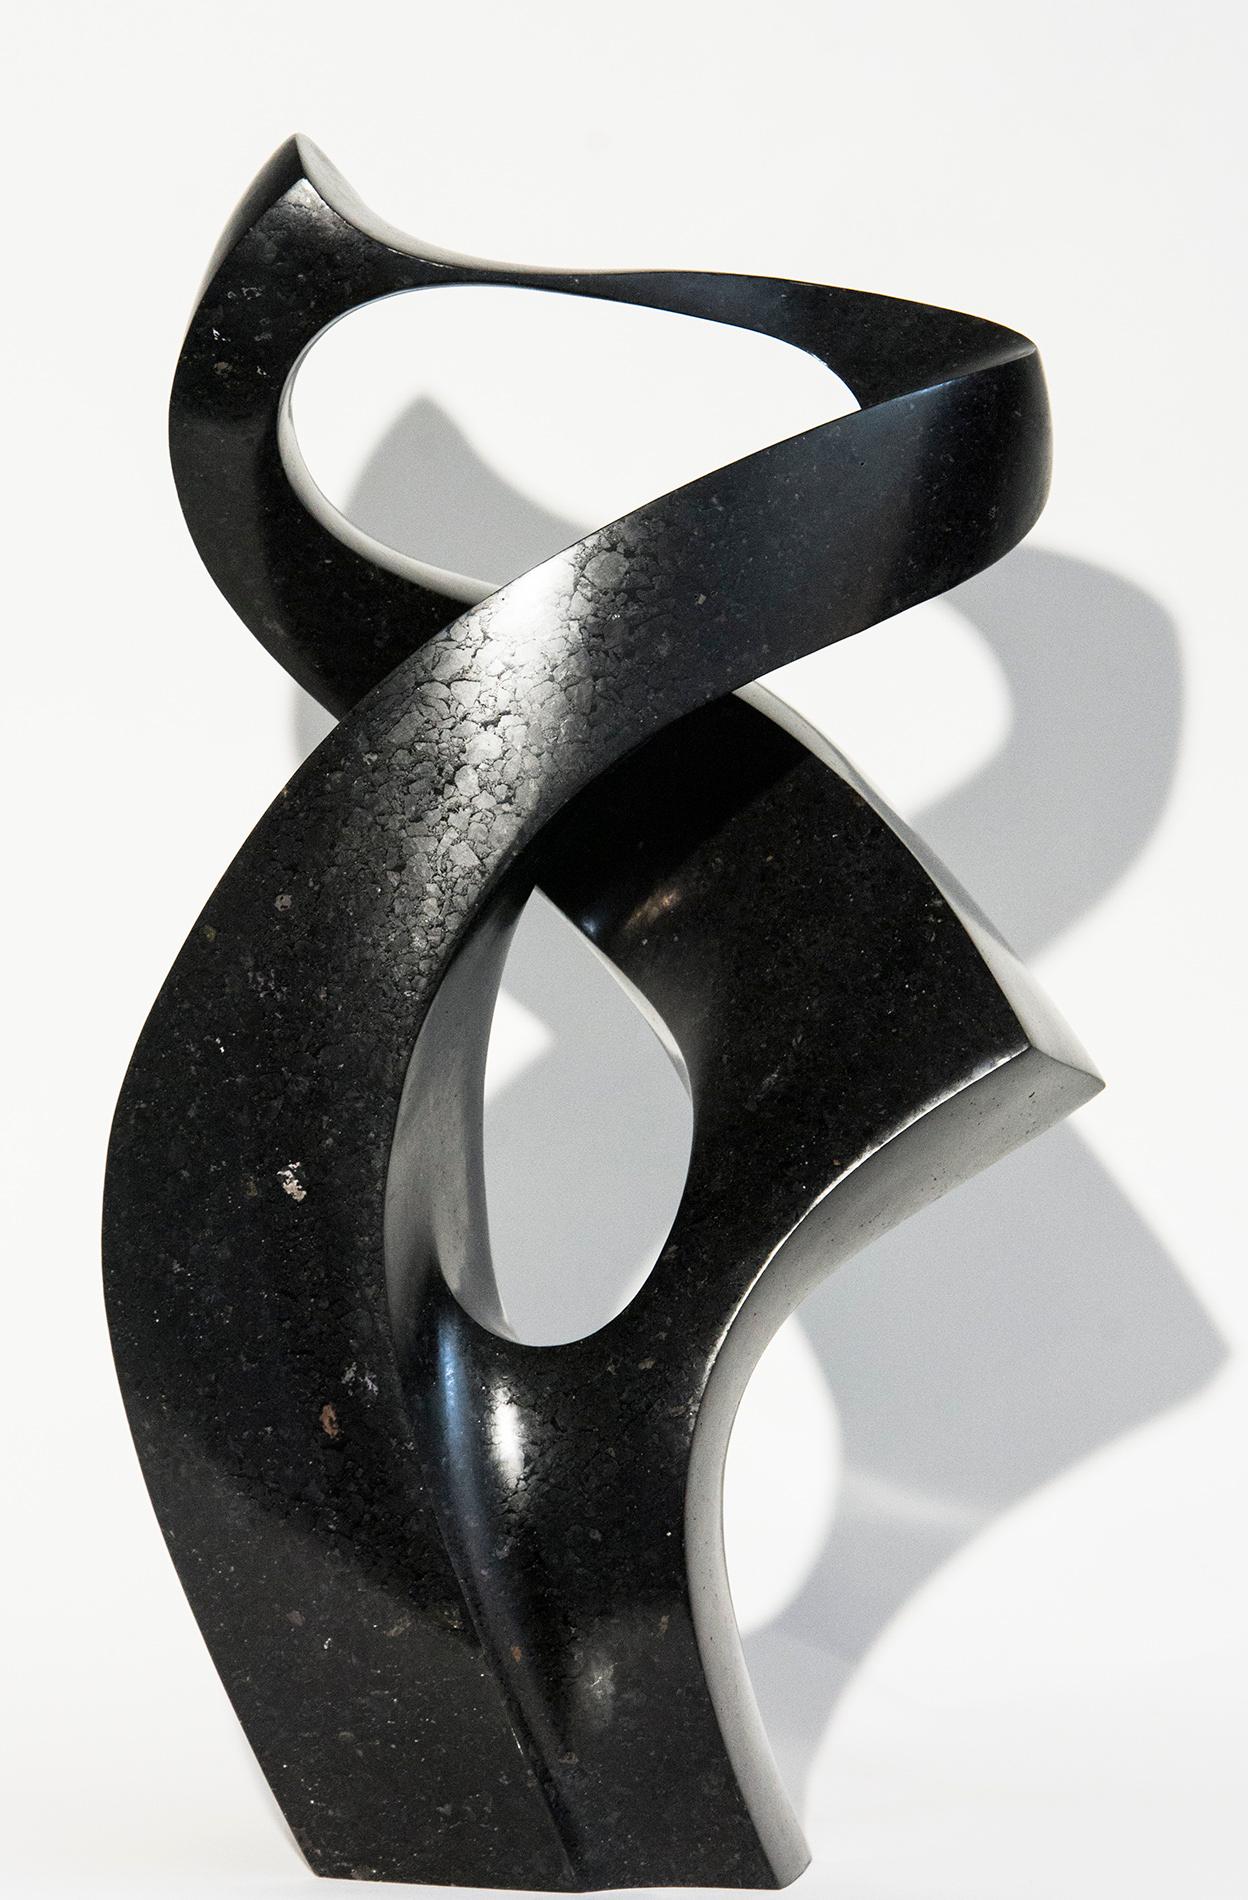 Embrace 4/50 - dark, smooth, polished, abstract, black granite sculpture - Sculpture by Jeremy Guy